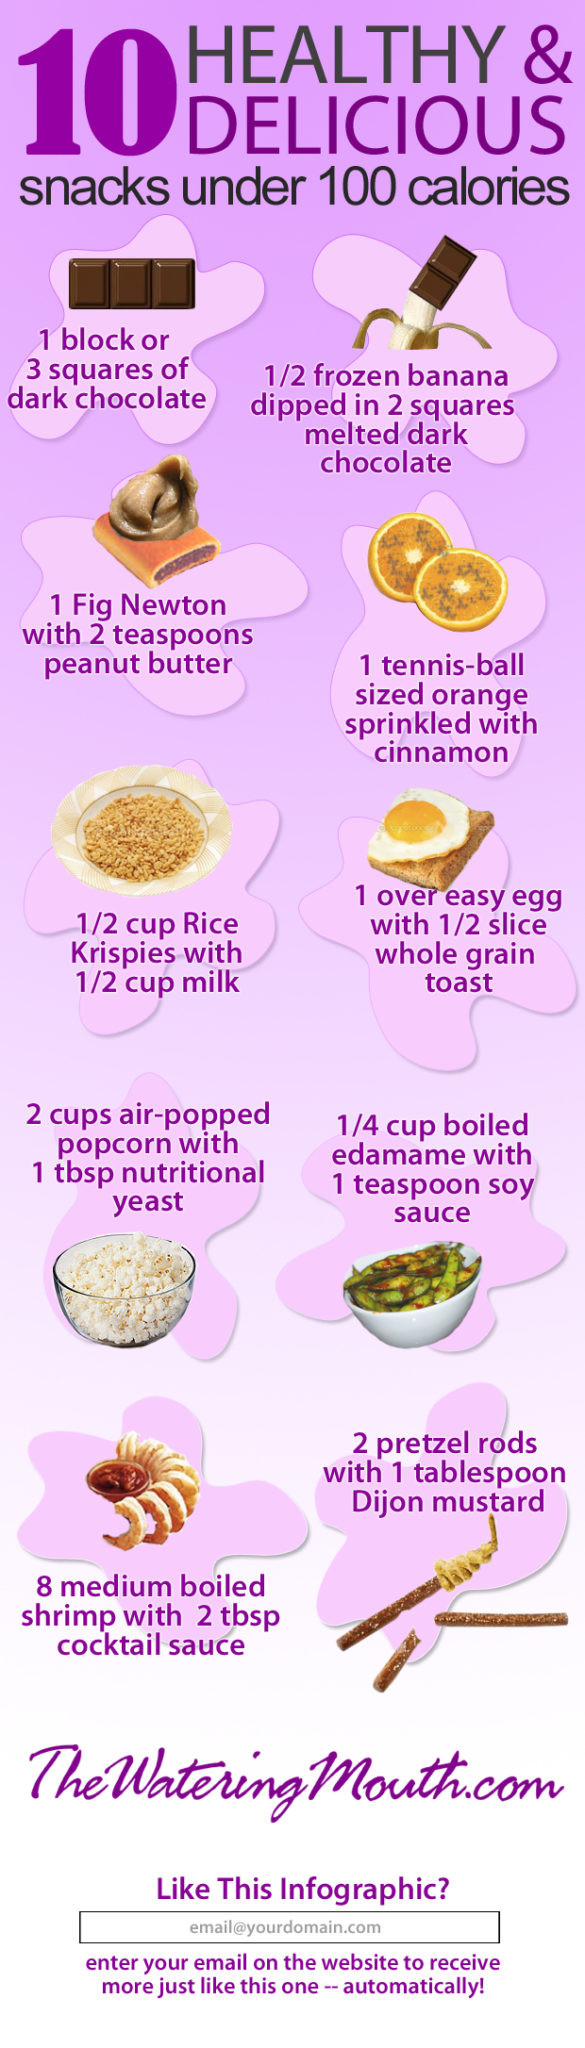 100 Calorie Snacks List
 10 Healthy Snacks Under 100 Calories [ infographic] The